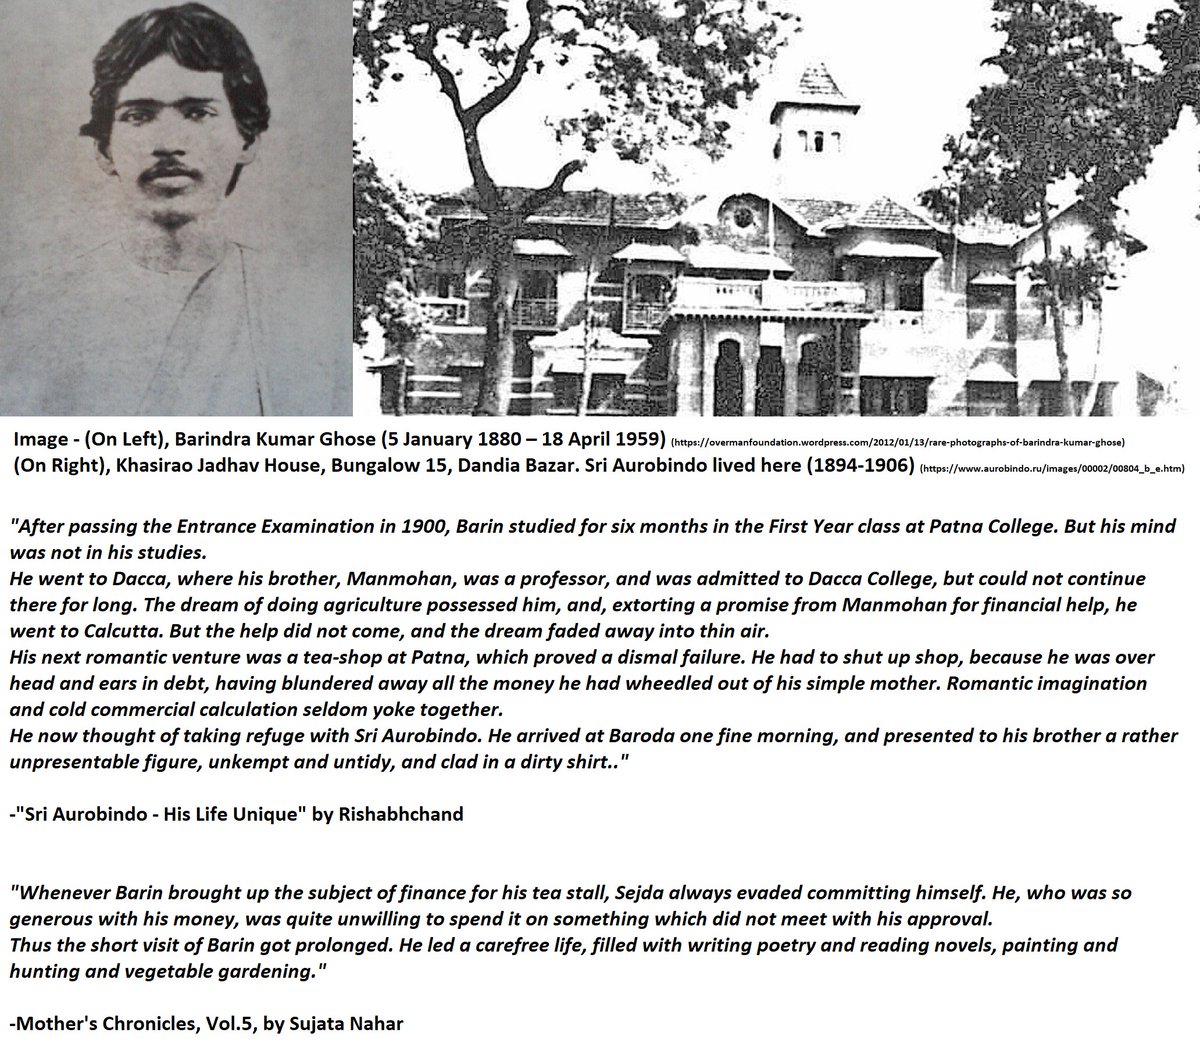 15) Welcoming Barin in Baroda:Barindra Kumar,  #SriAurobindo's youngest brother, would suddenly turn up in Baroda in 1901, just a few months after Sri Aurobindo's marriageOne with a romantic imagination, he would keep pestering his 'Sejda' for supporting his ever new ventures: